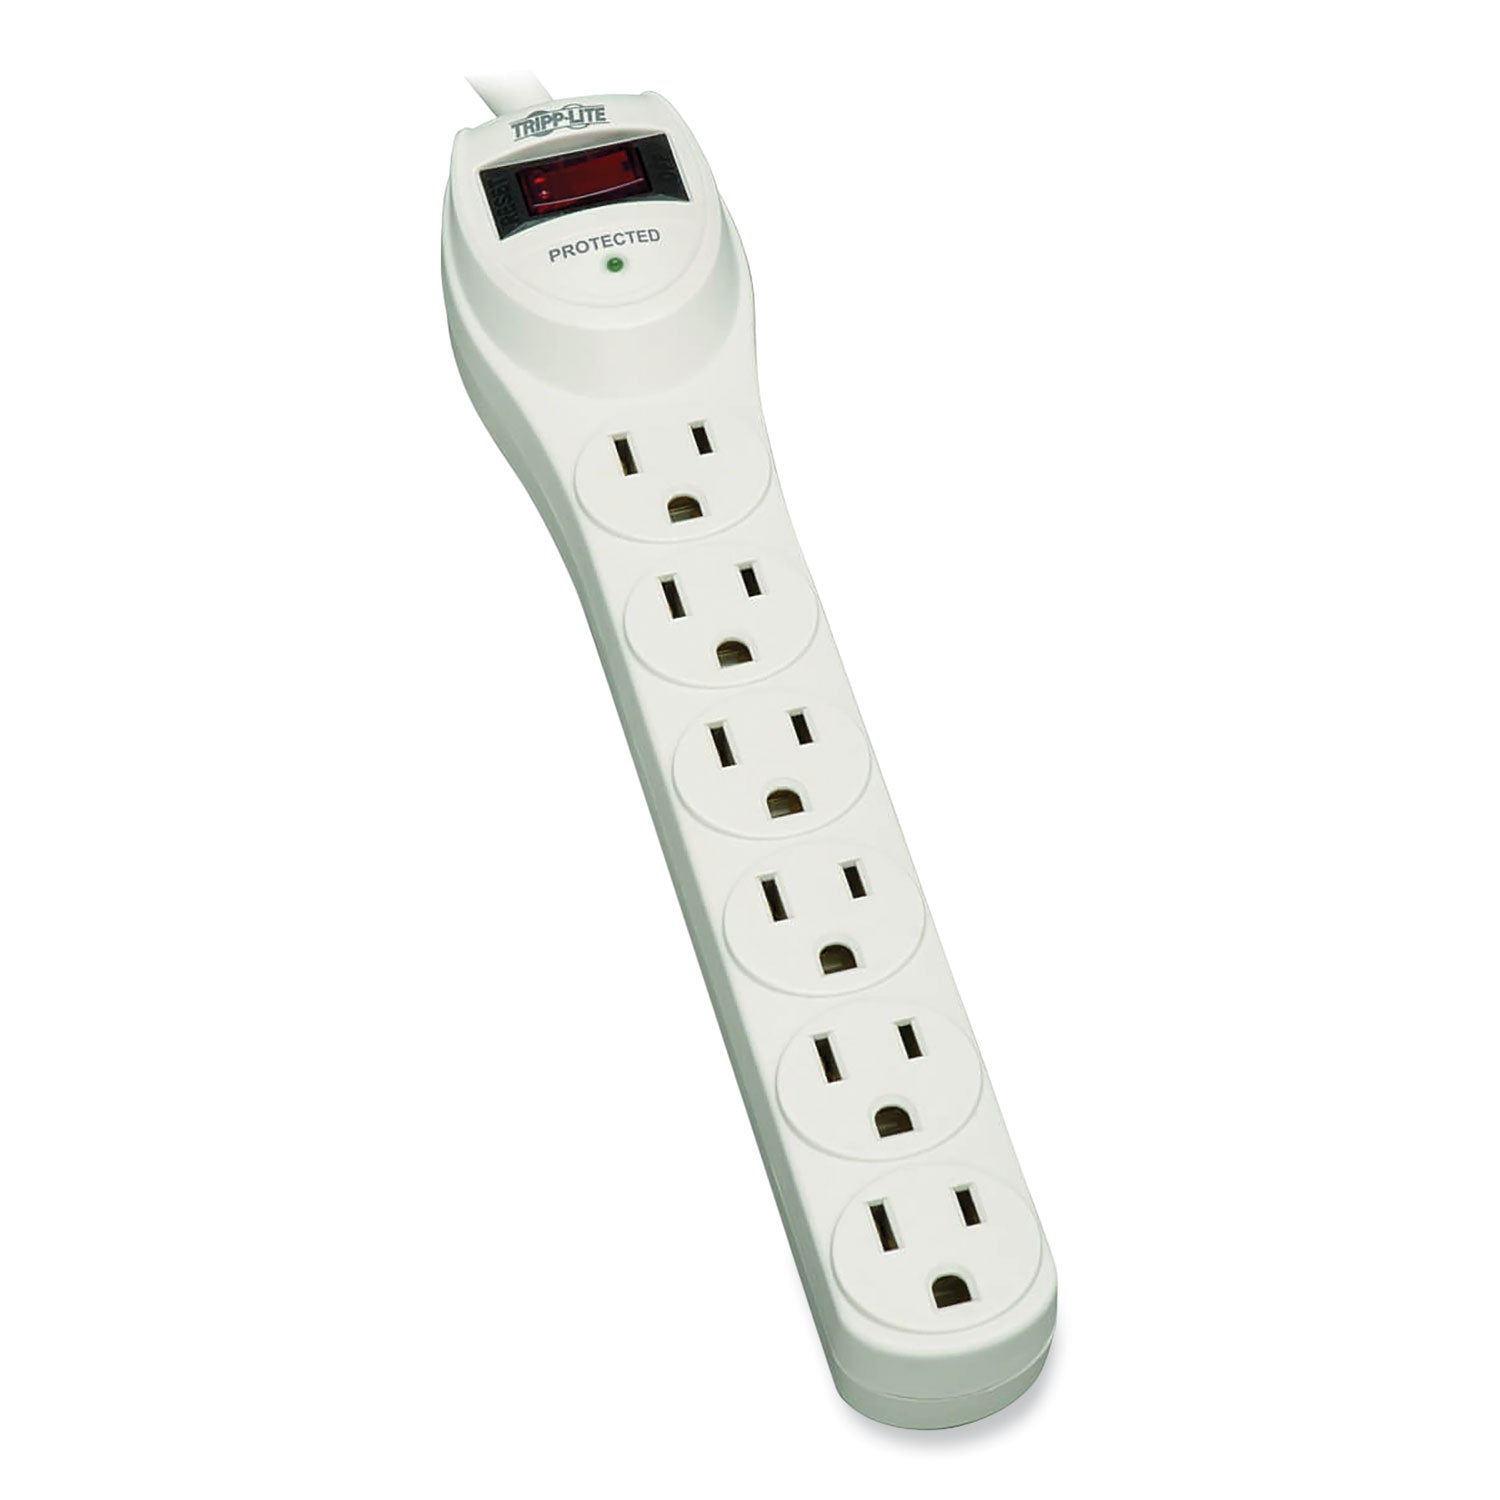 Protect It! Home Computer Surge Protector, 6 AC Outlets, 2 ft Cord, 180 J, Light Gray - 